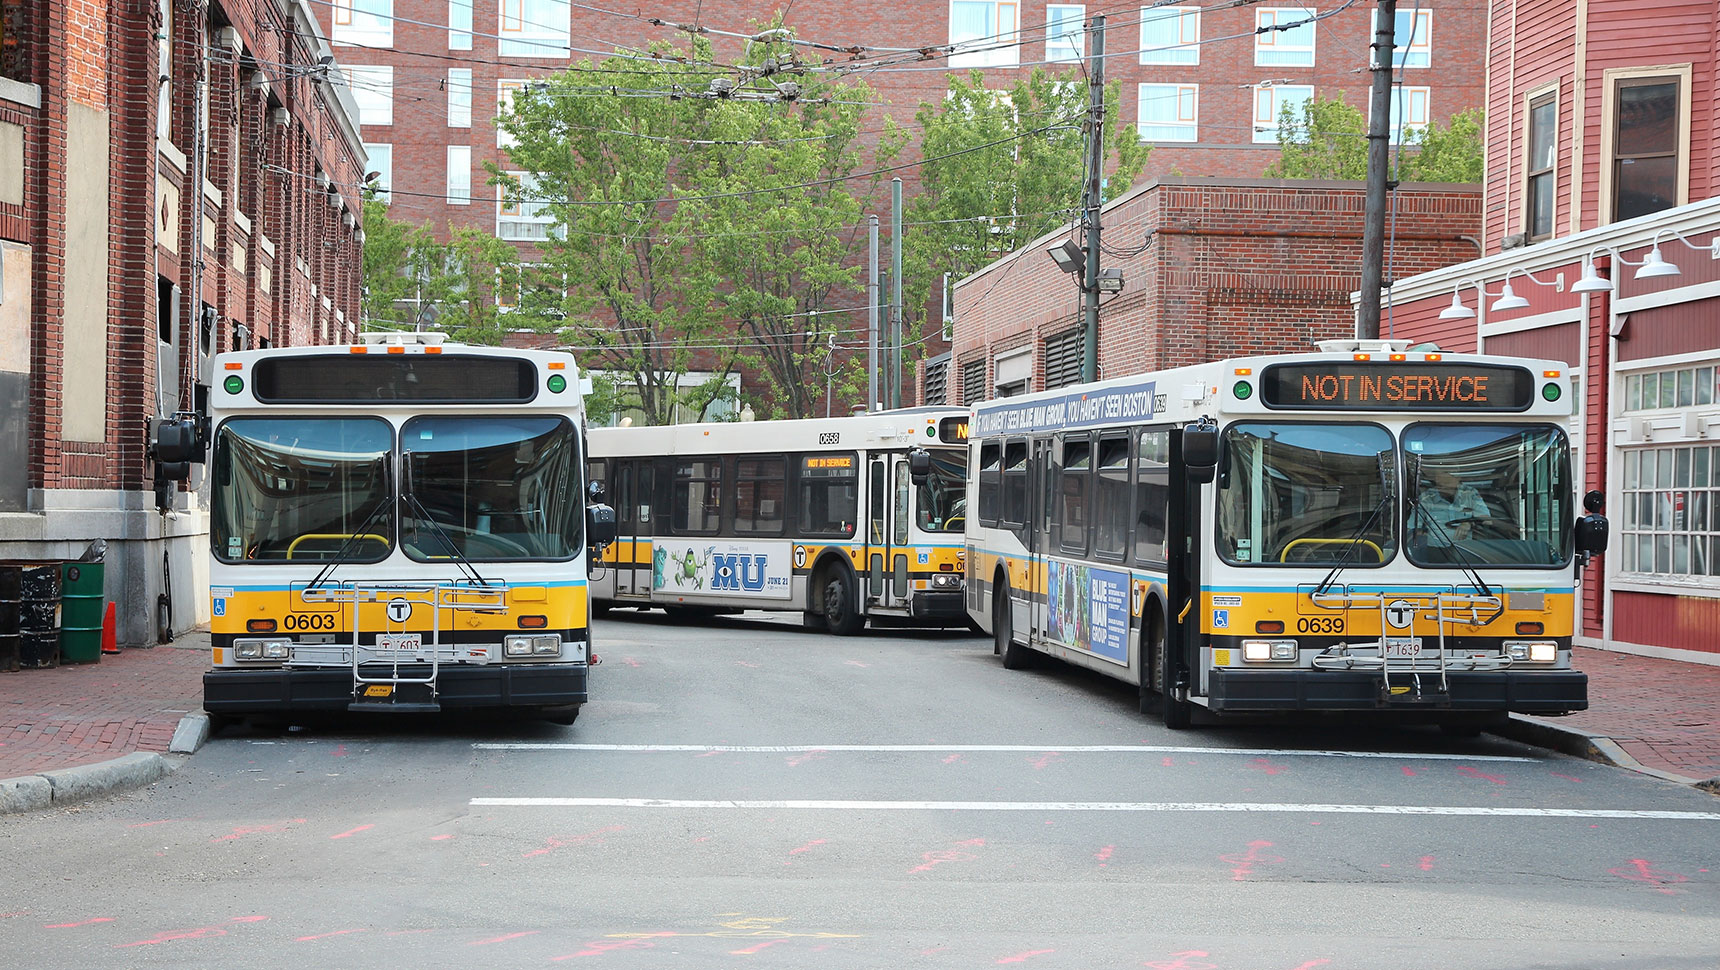 Three city buses parked on the street